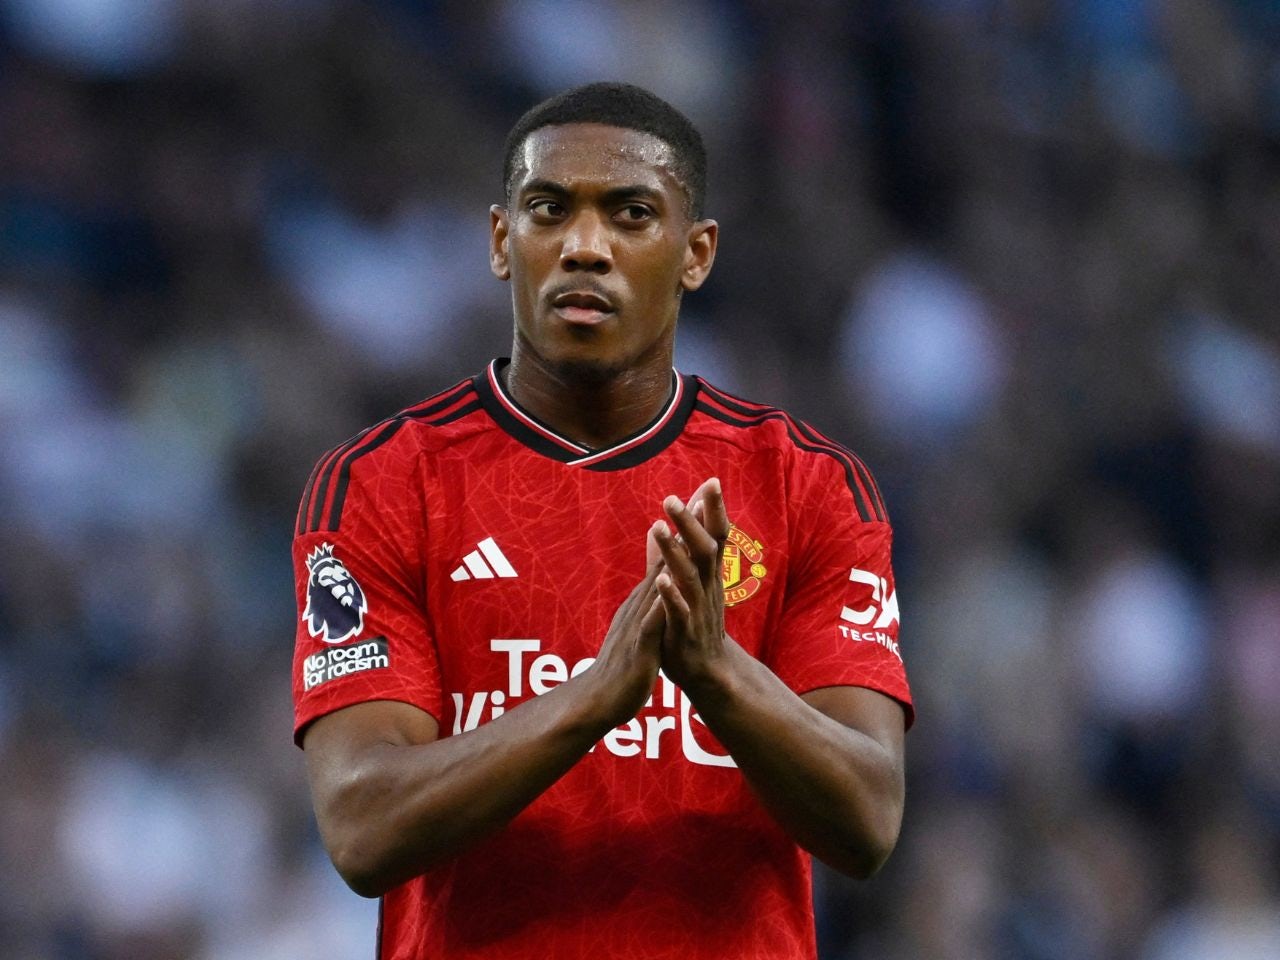 LIVE! Transfer news and rumours: Martial agent rules out Man Utd exit, Ronaldo wants Casemiro reunion